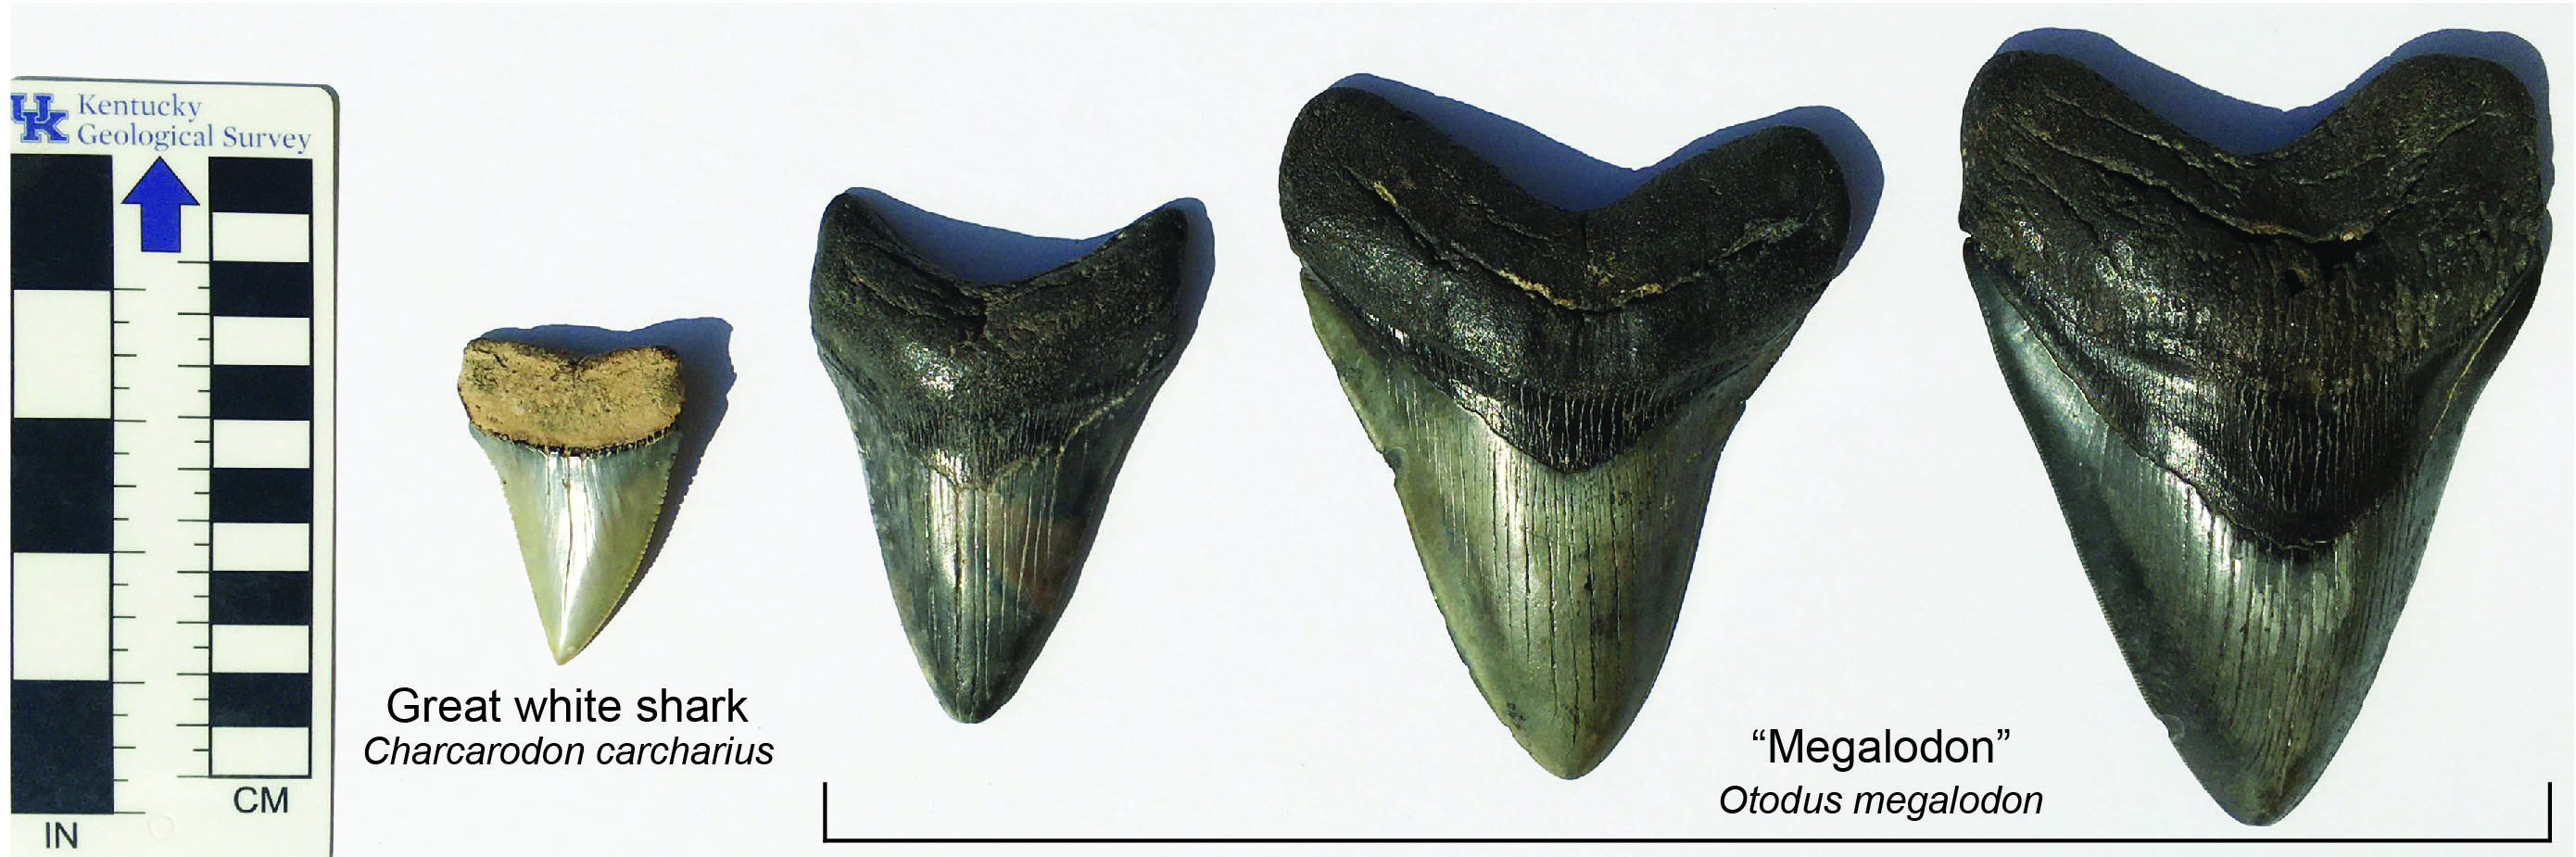 MEGALODON TOOTH Fossil SHARK 2.901 inches Up to 25 Million Years Old #1516 5o 